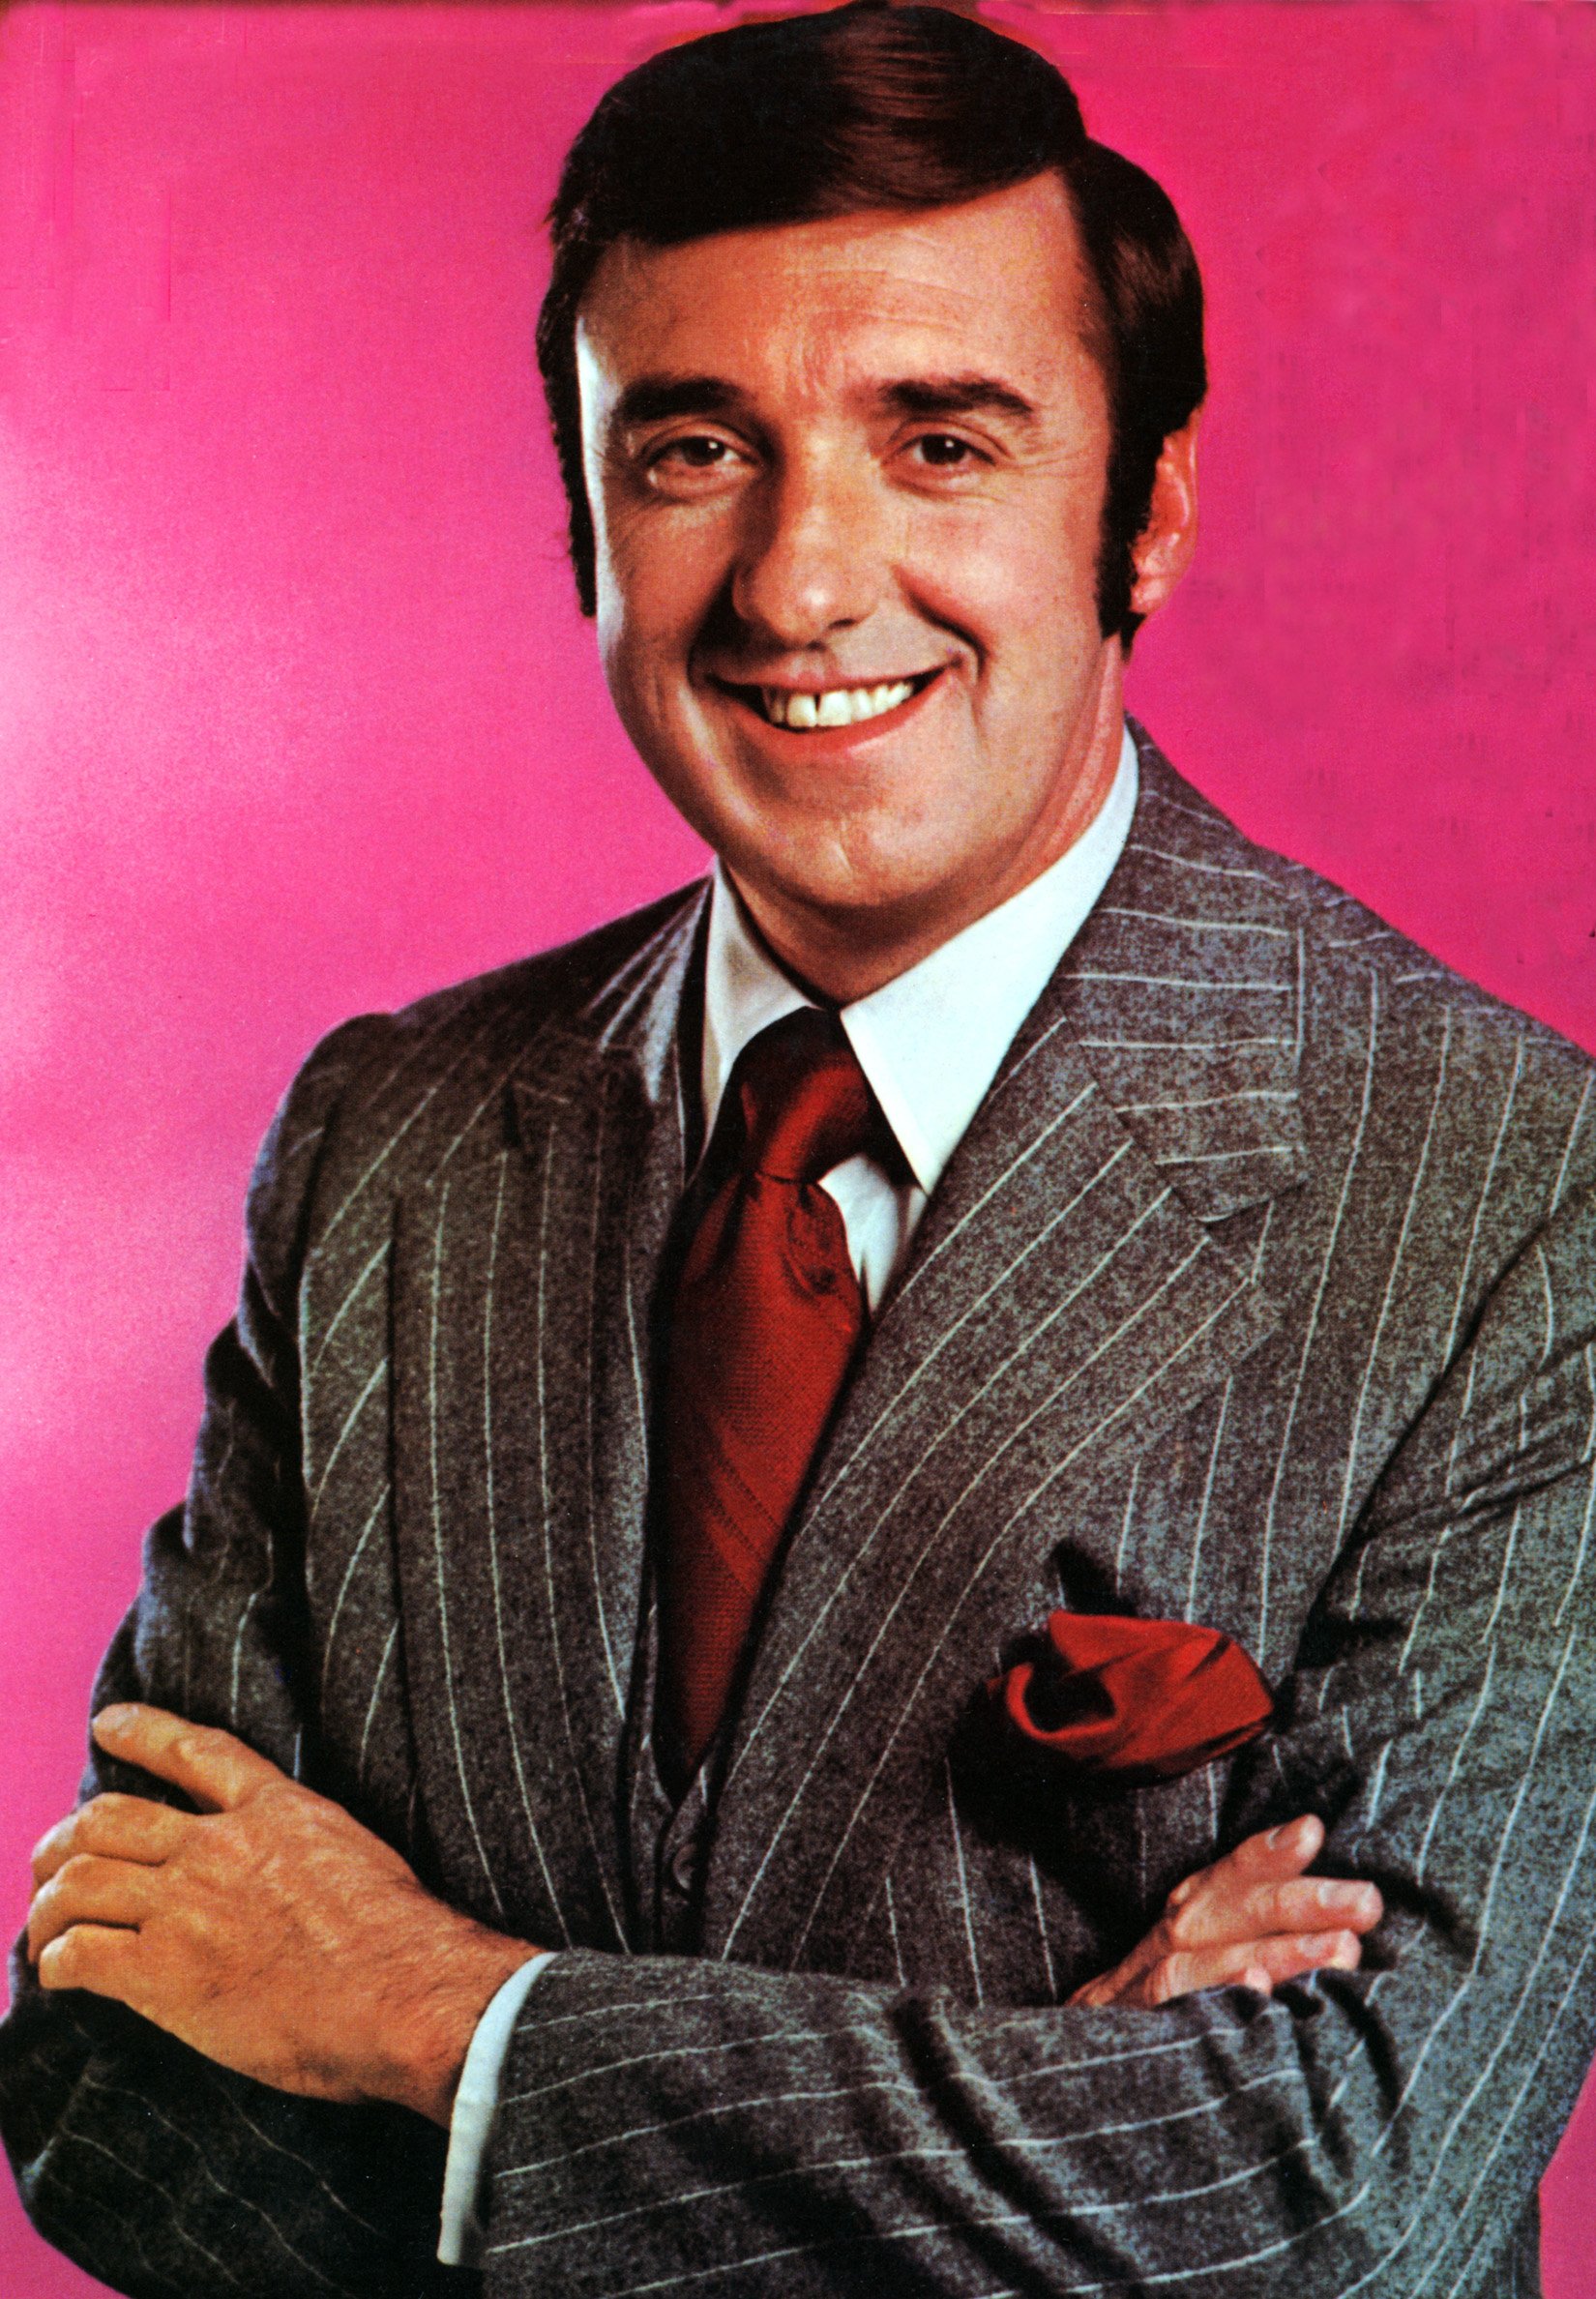 A headshot portrait of television icon Jim Nabors posing while folding his arms. | Source: Getty Images